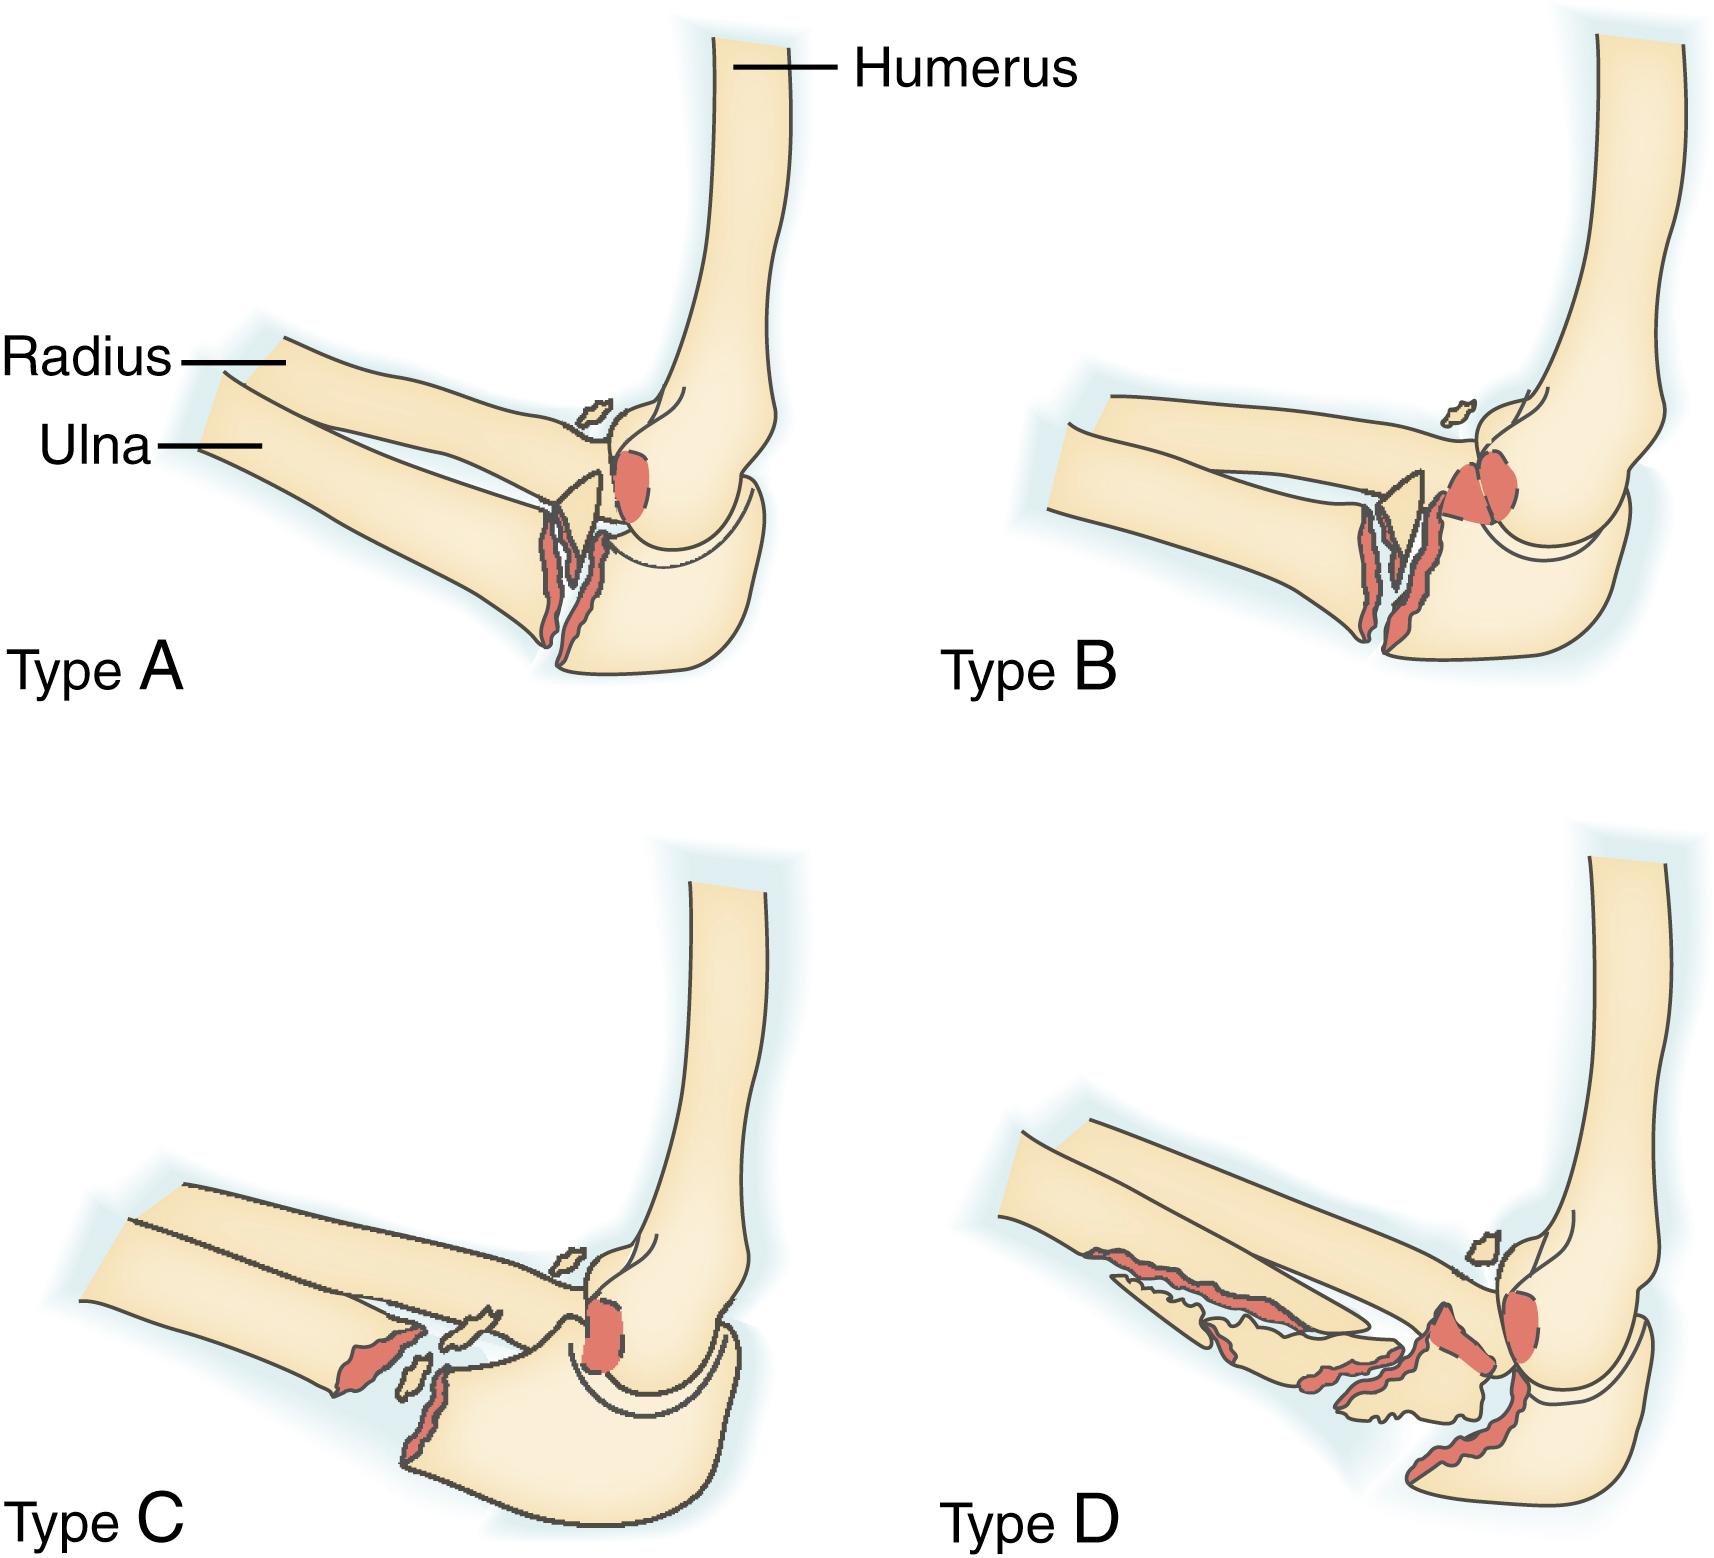 Fig. 20.4, Illustration of a spectrum of posterior Monteggia injuries. Type A: injury at the ulnohumeral joint with fractures of the olecranon and coronoid; type B: injury at the most common location, the proximal ulnar metaphysis; type C: injury at the diaphyseal level; type D: complex fractures that involve multiple levels.